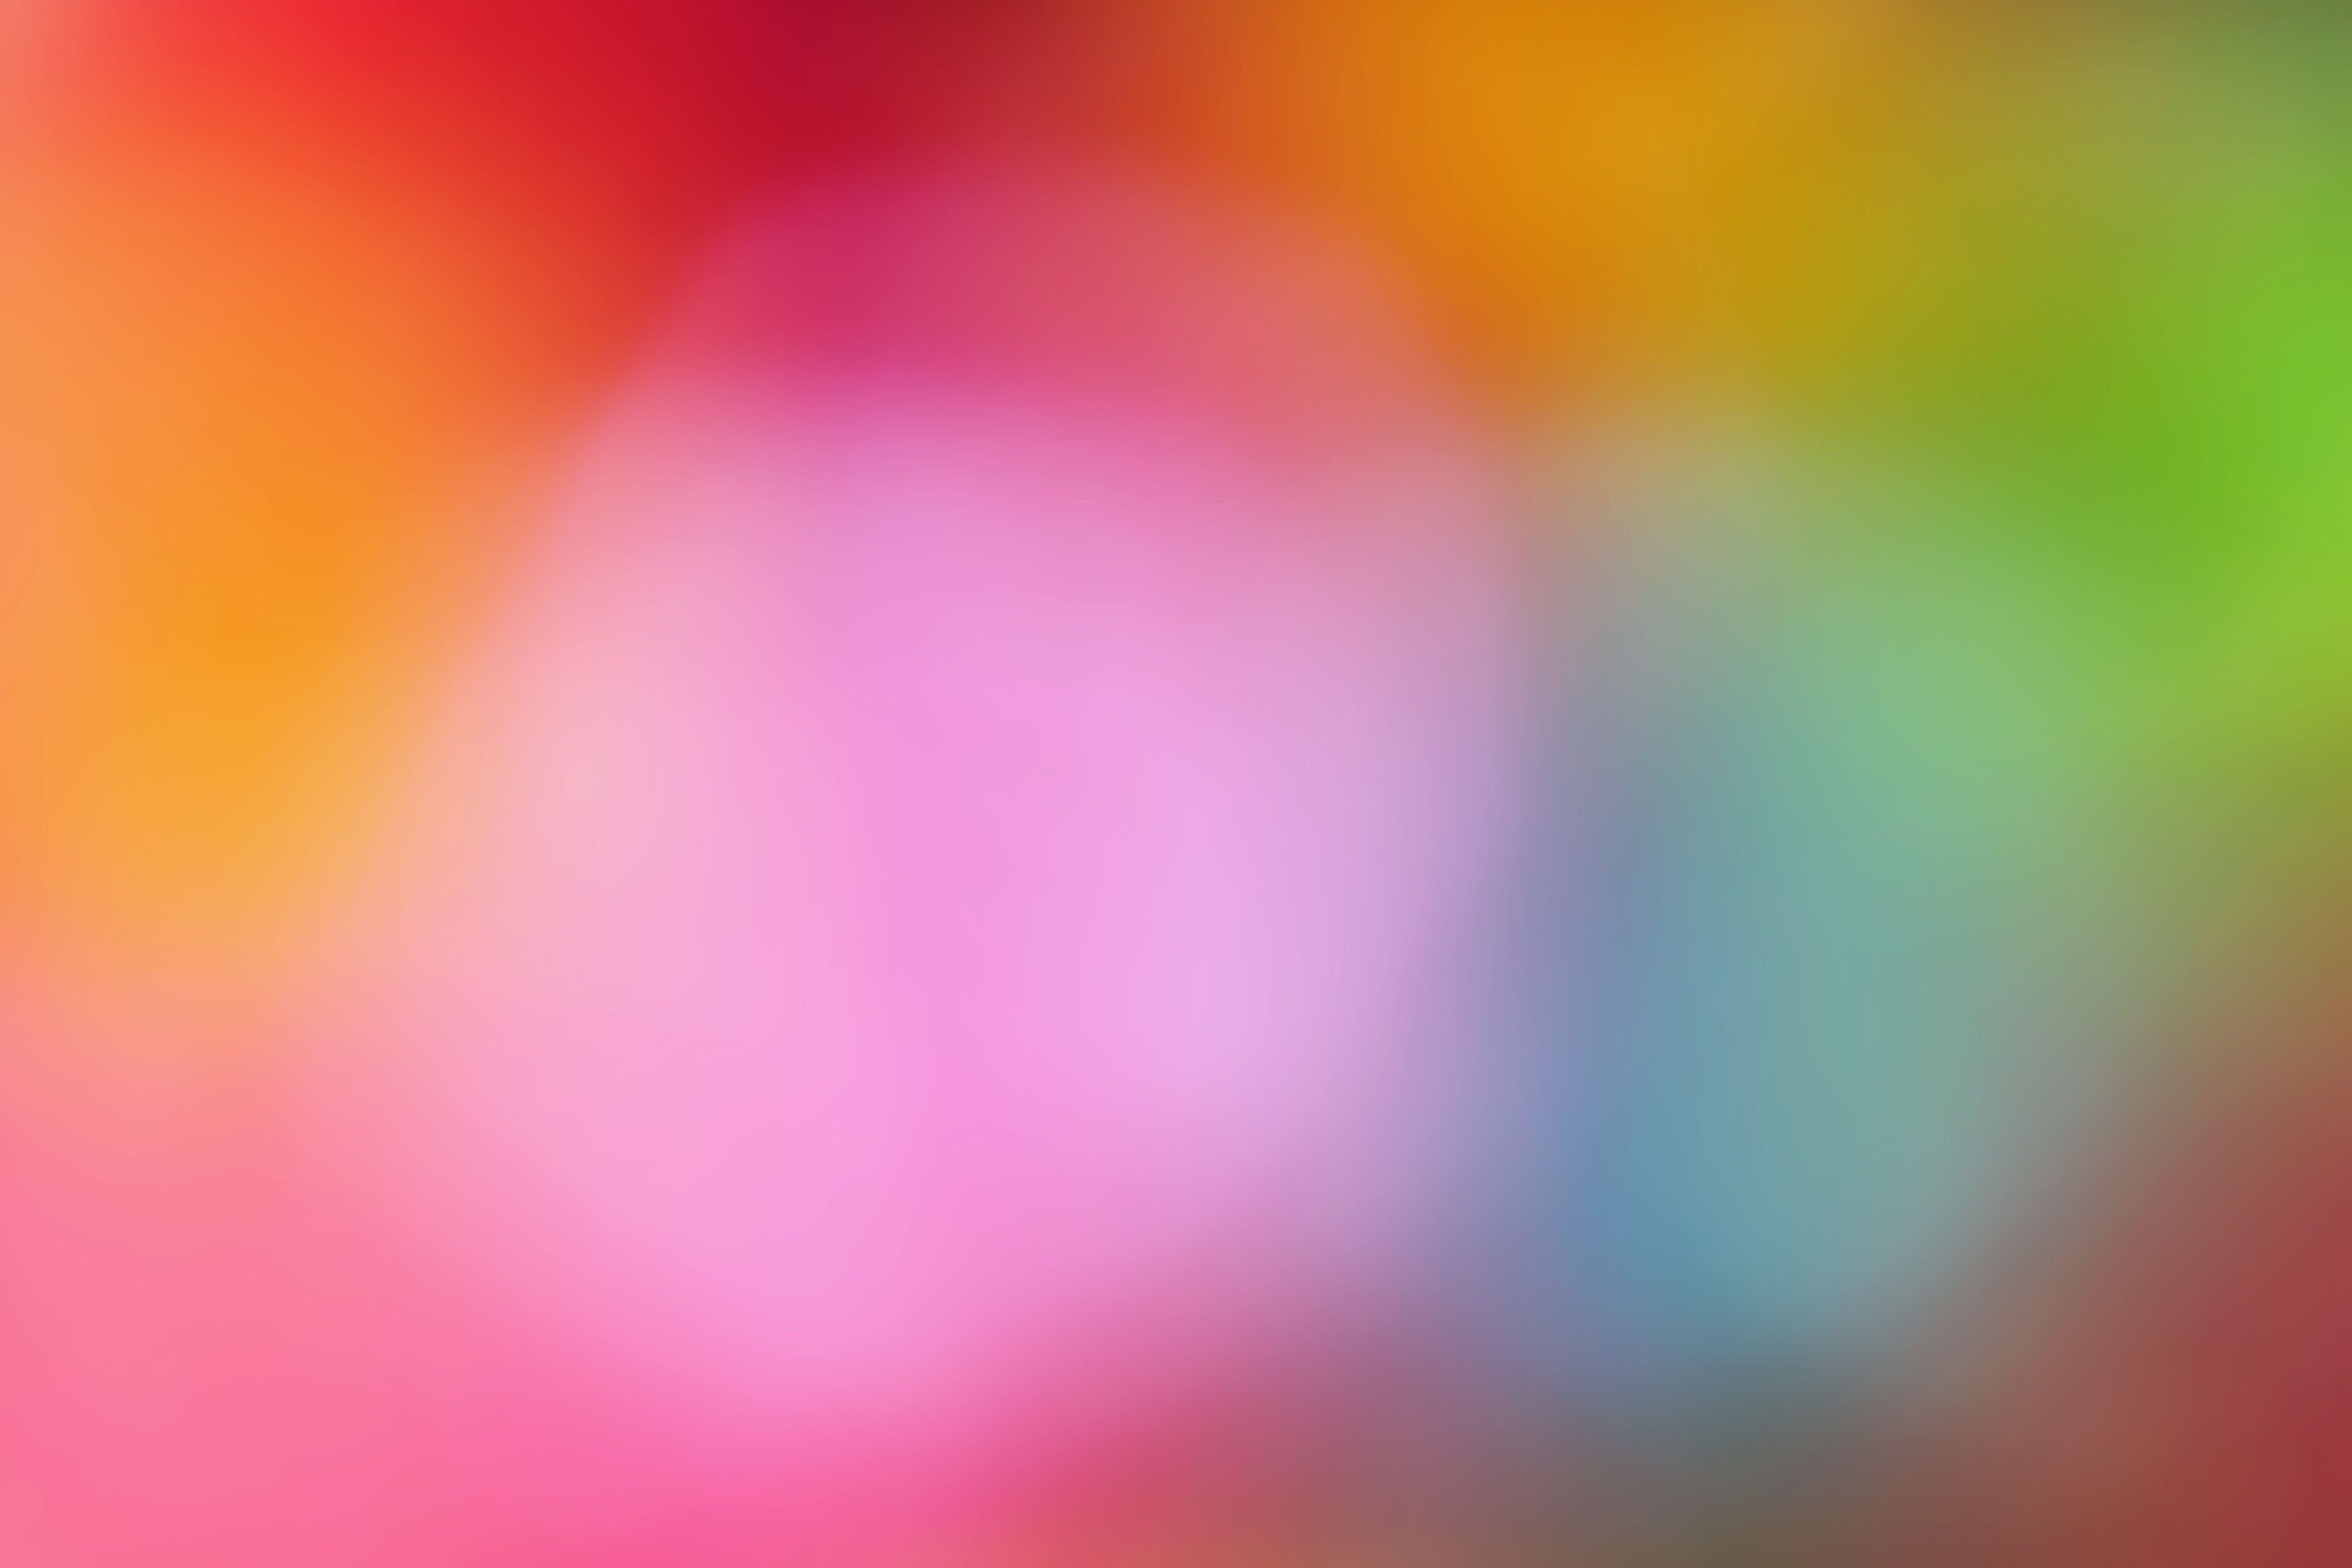 Neon Melted Cotton Candy wallpaper   ForWallpapercom